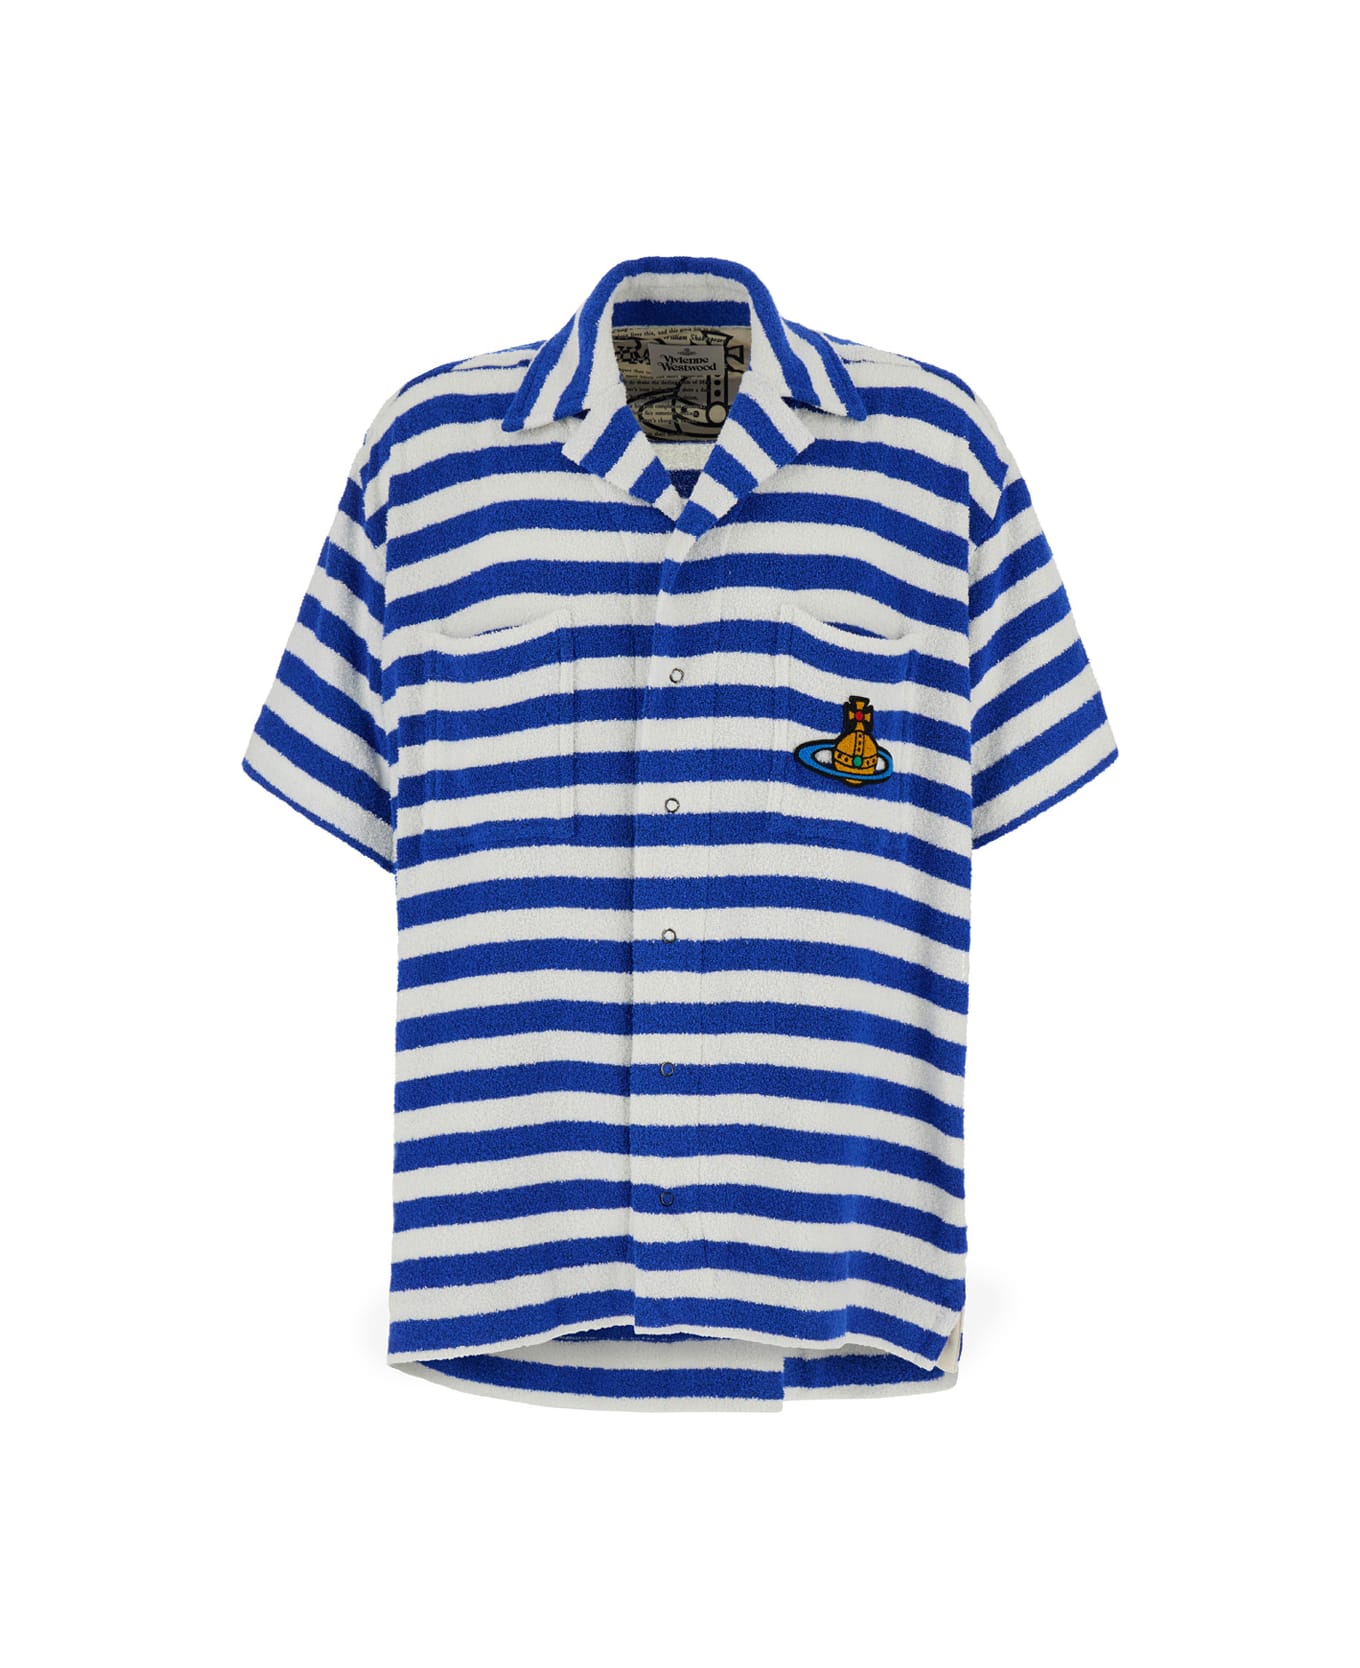 Vivienne Westwood Blue And White Striped Bowling Shirt With Orb Embroidery In Cotton Blend Man - WHITE